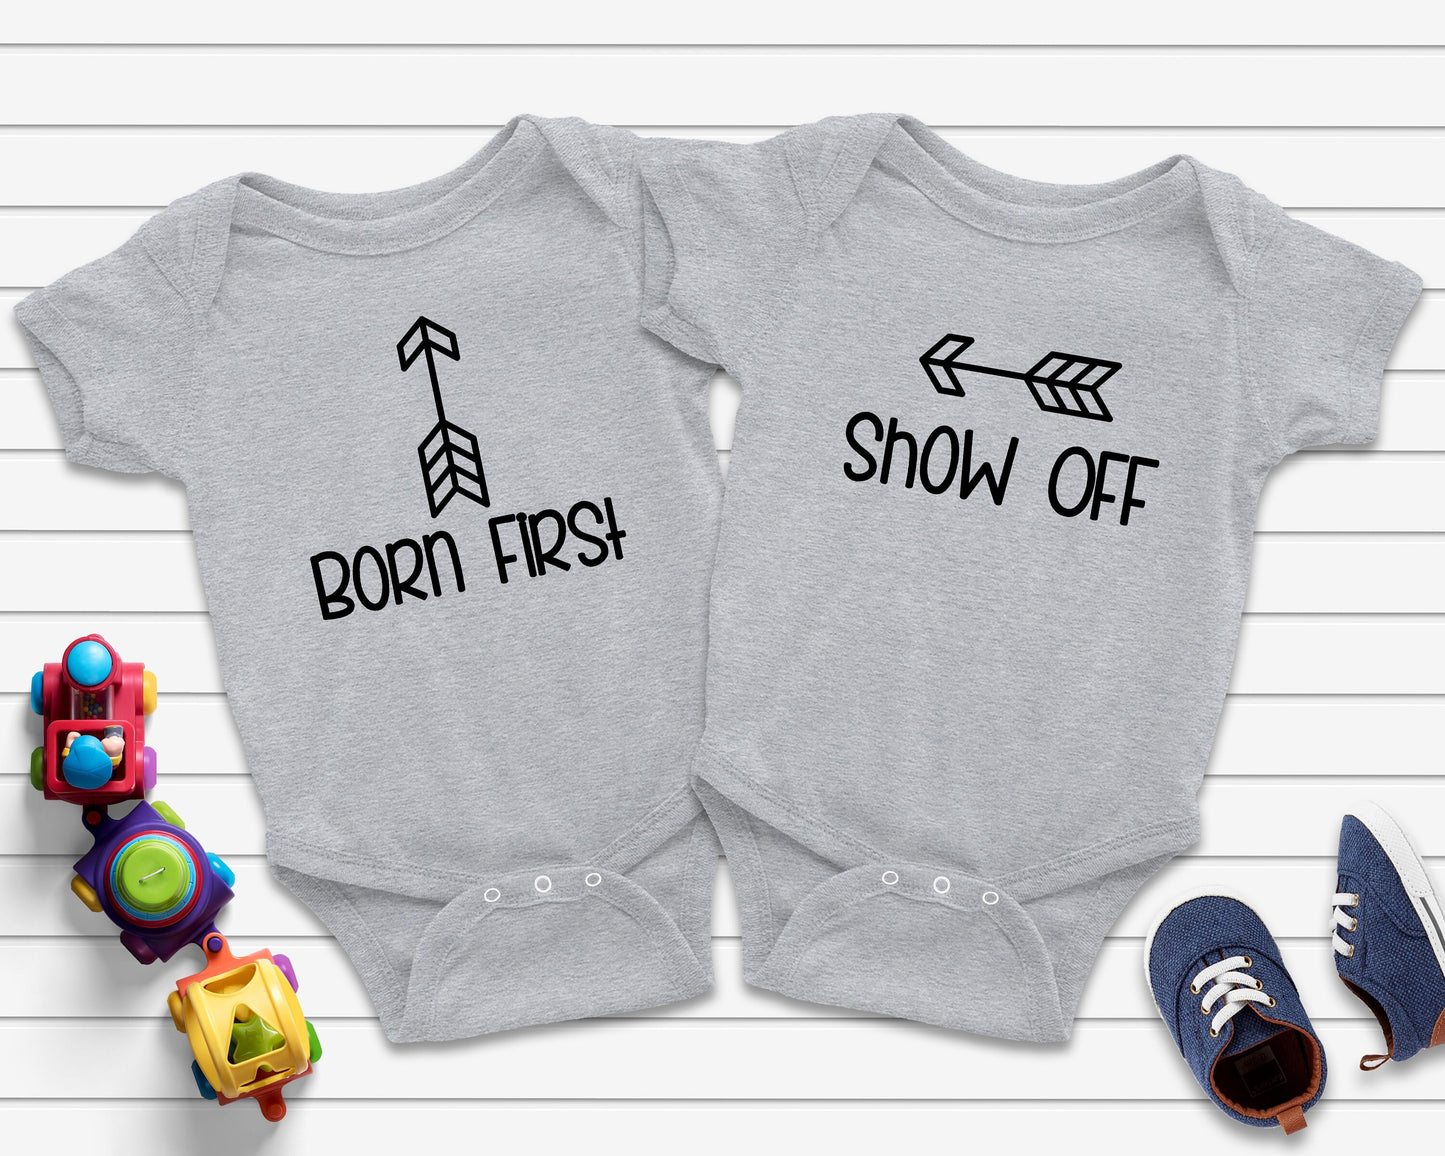 Born First and Show Off Bodysuits for Twins - Identical Twins - Twin Tees - Fraternal Twins - Shirts for Twins - Twin Outfits